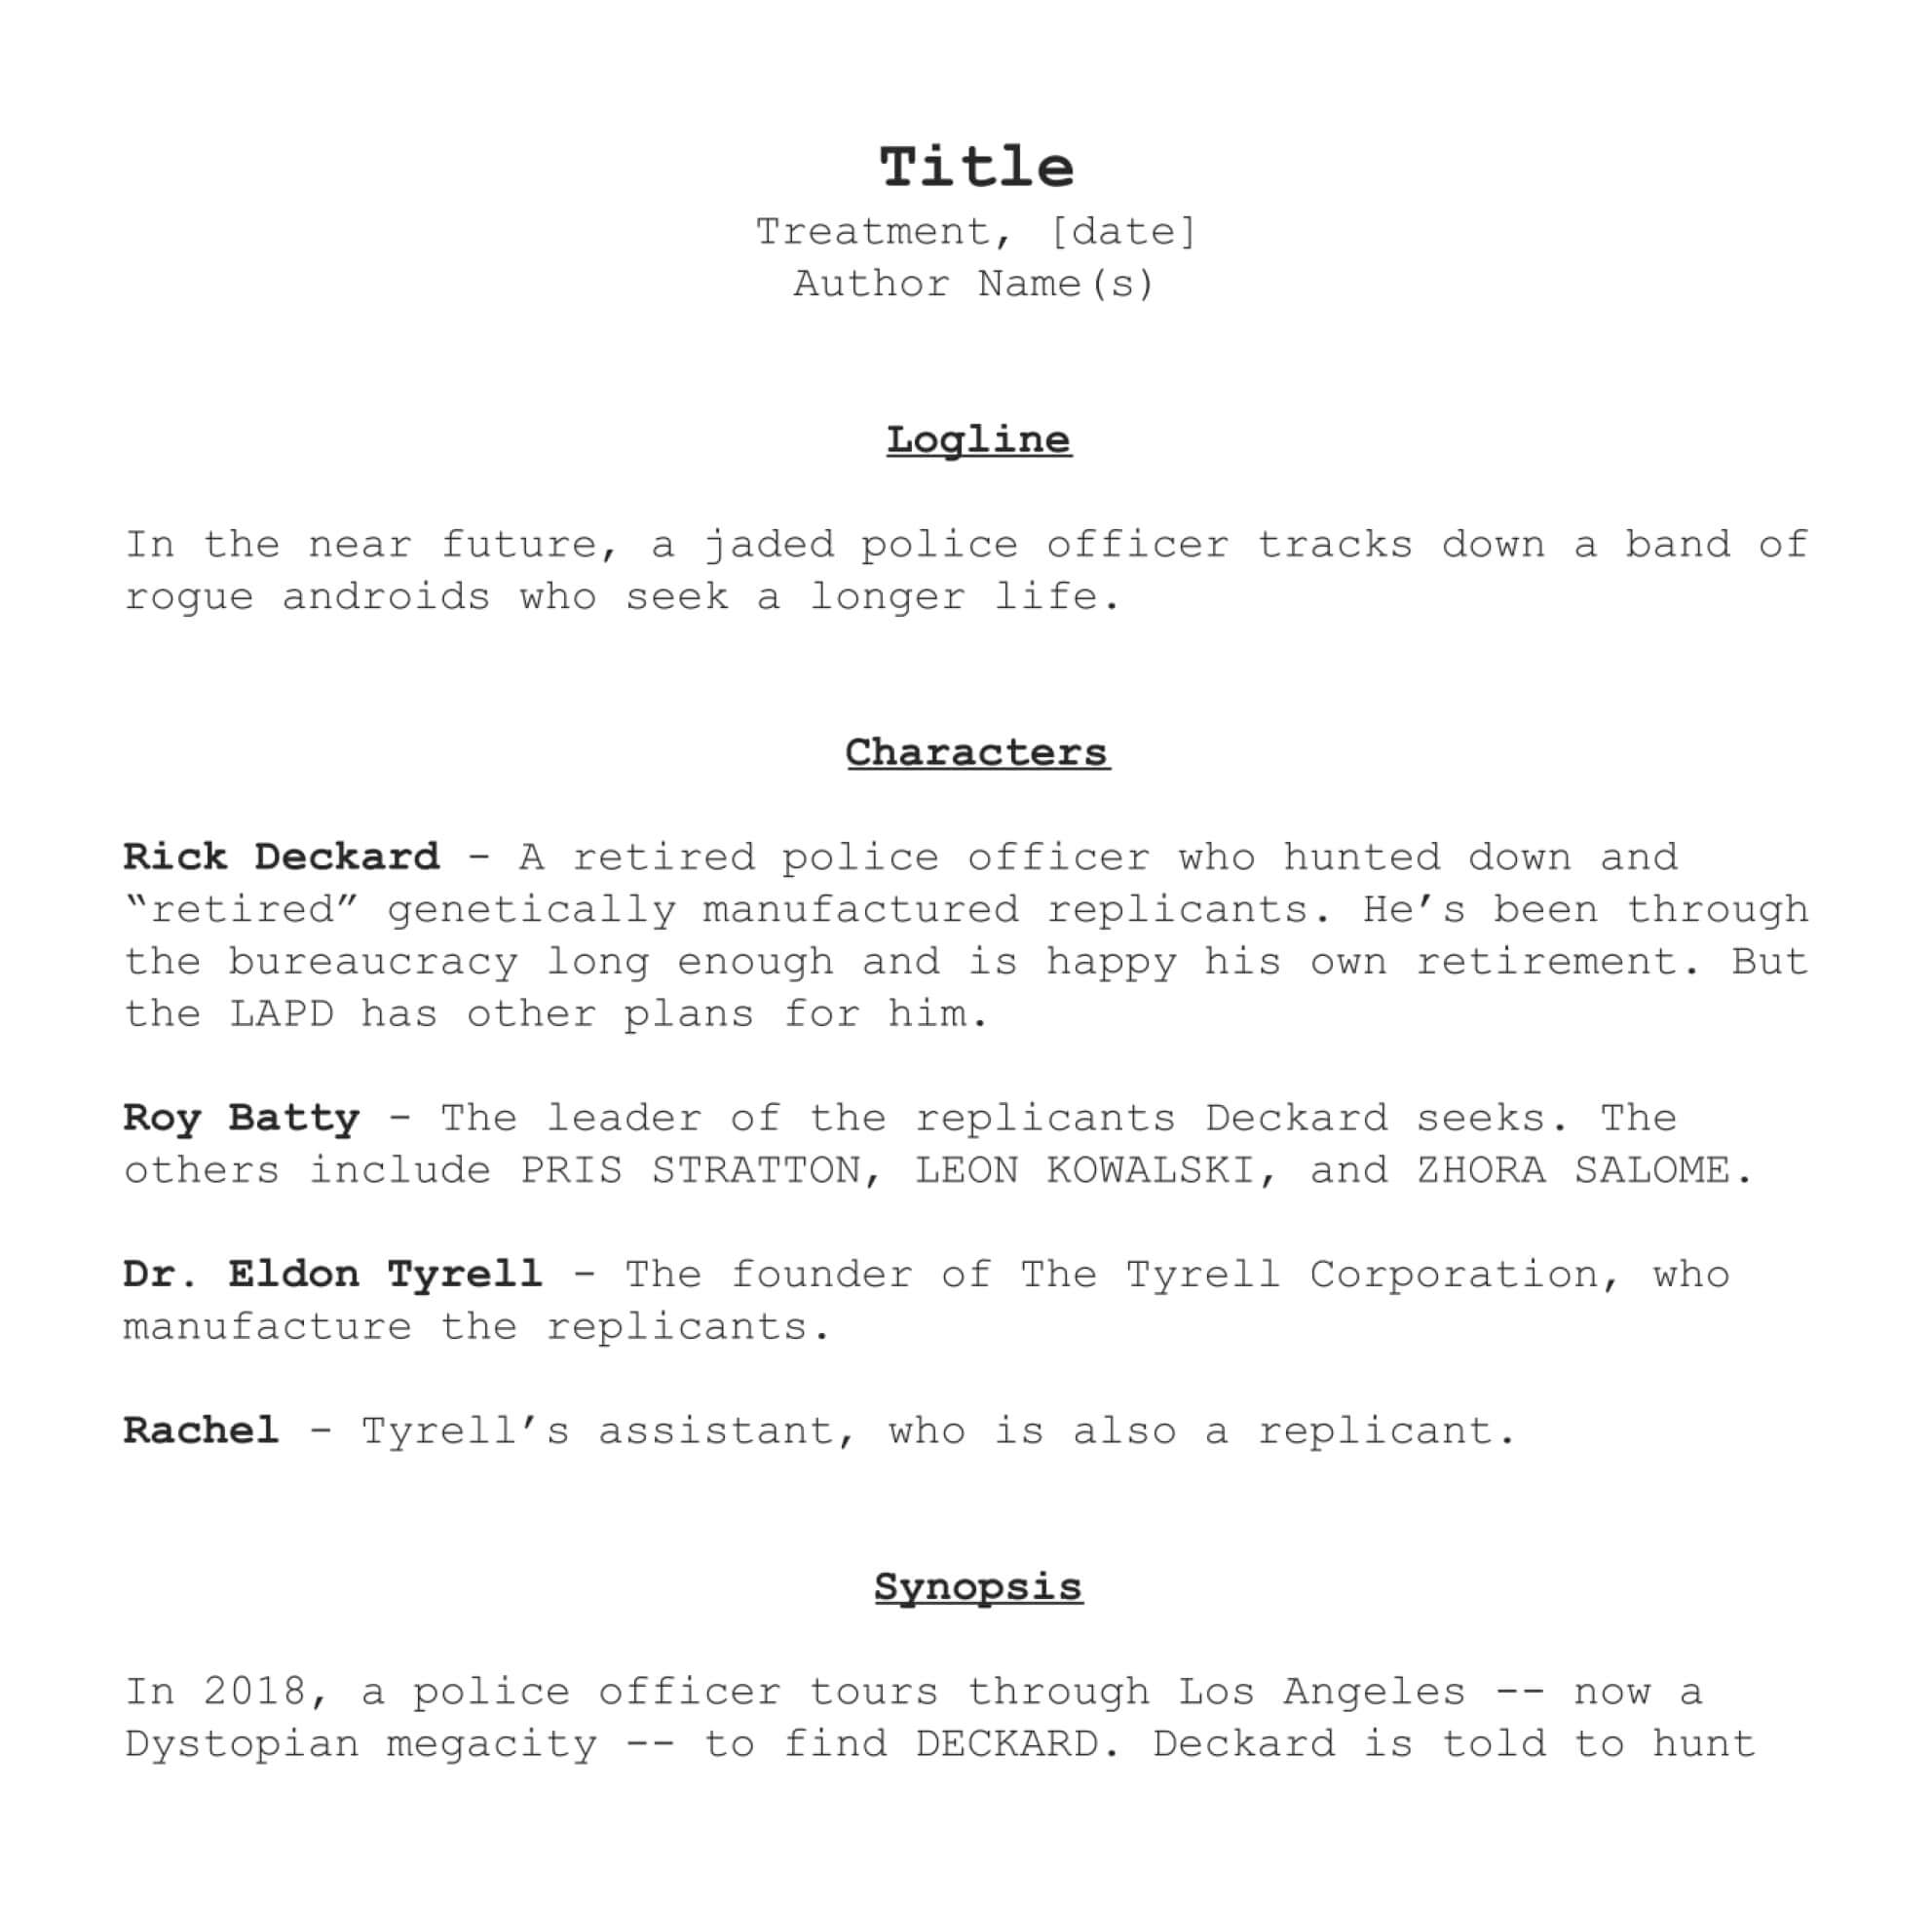 How to Write a Film Treatment  FREE Treatment Template & Examples